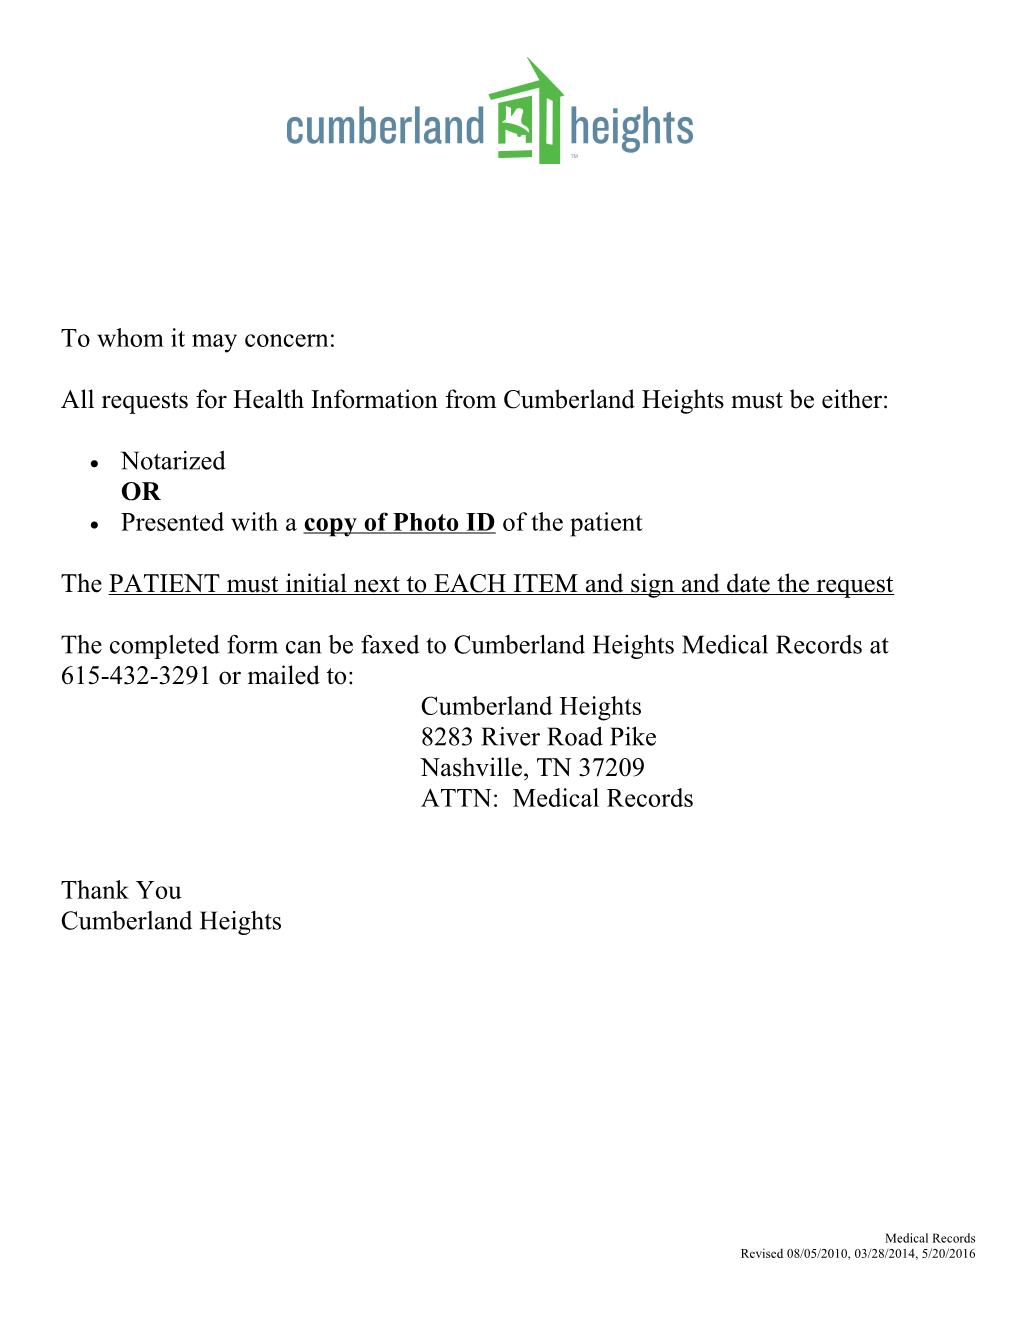 All Requests for Health Information from Cumberland Heights Must Be Either